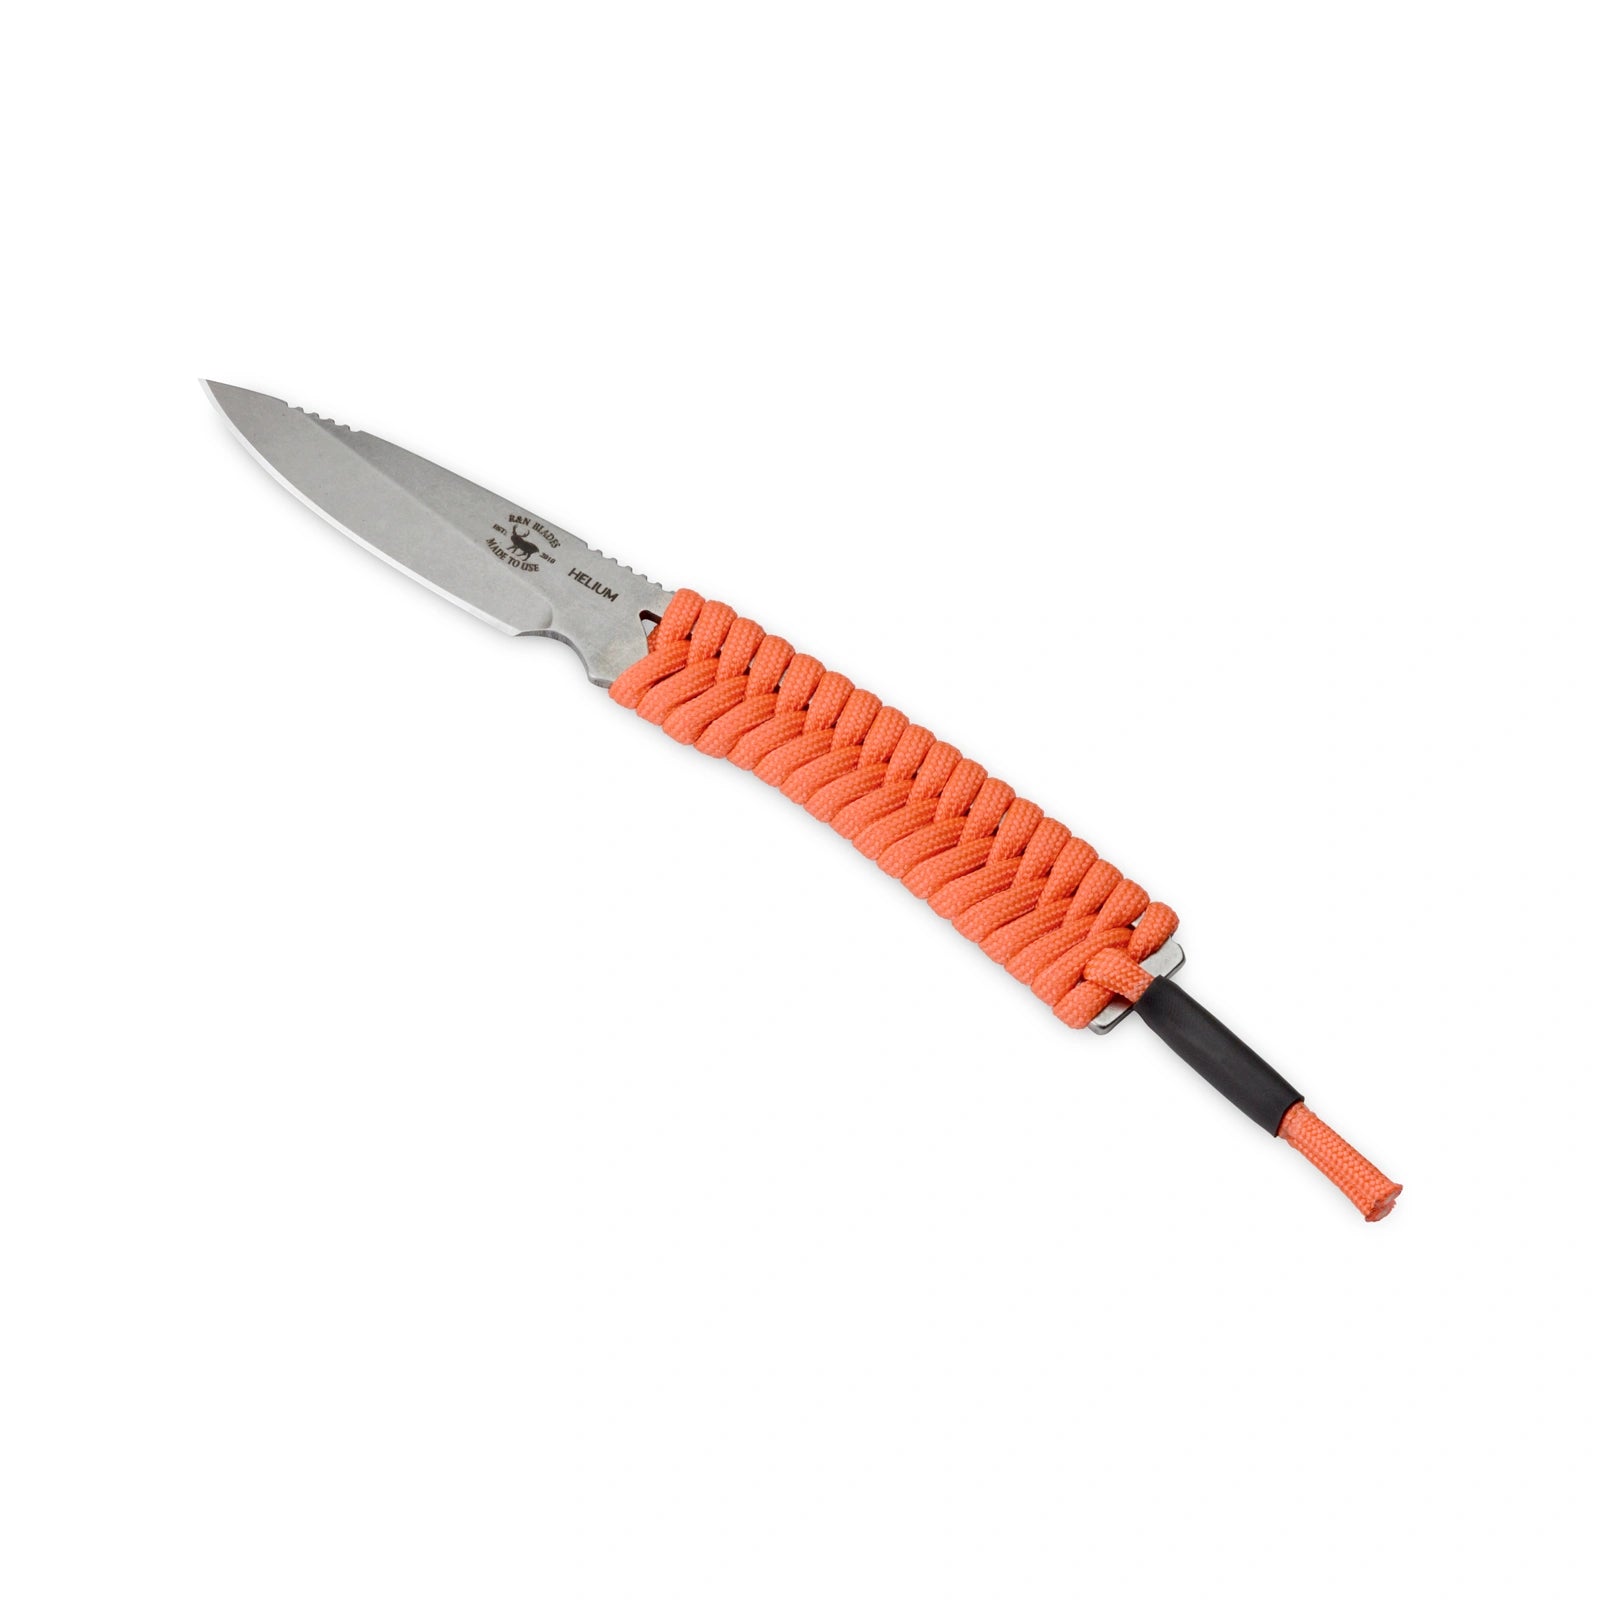 r and n blades helium knife product image